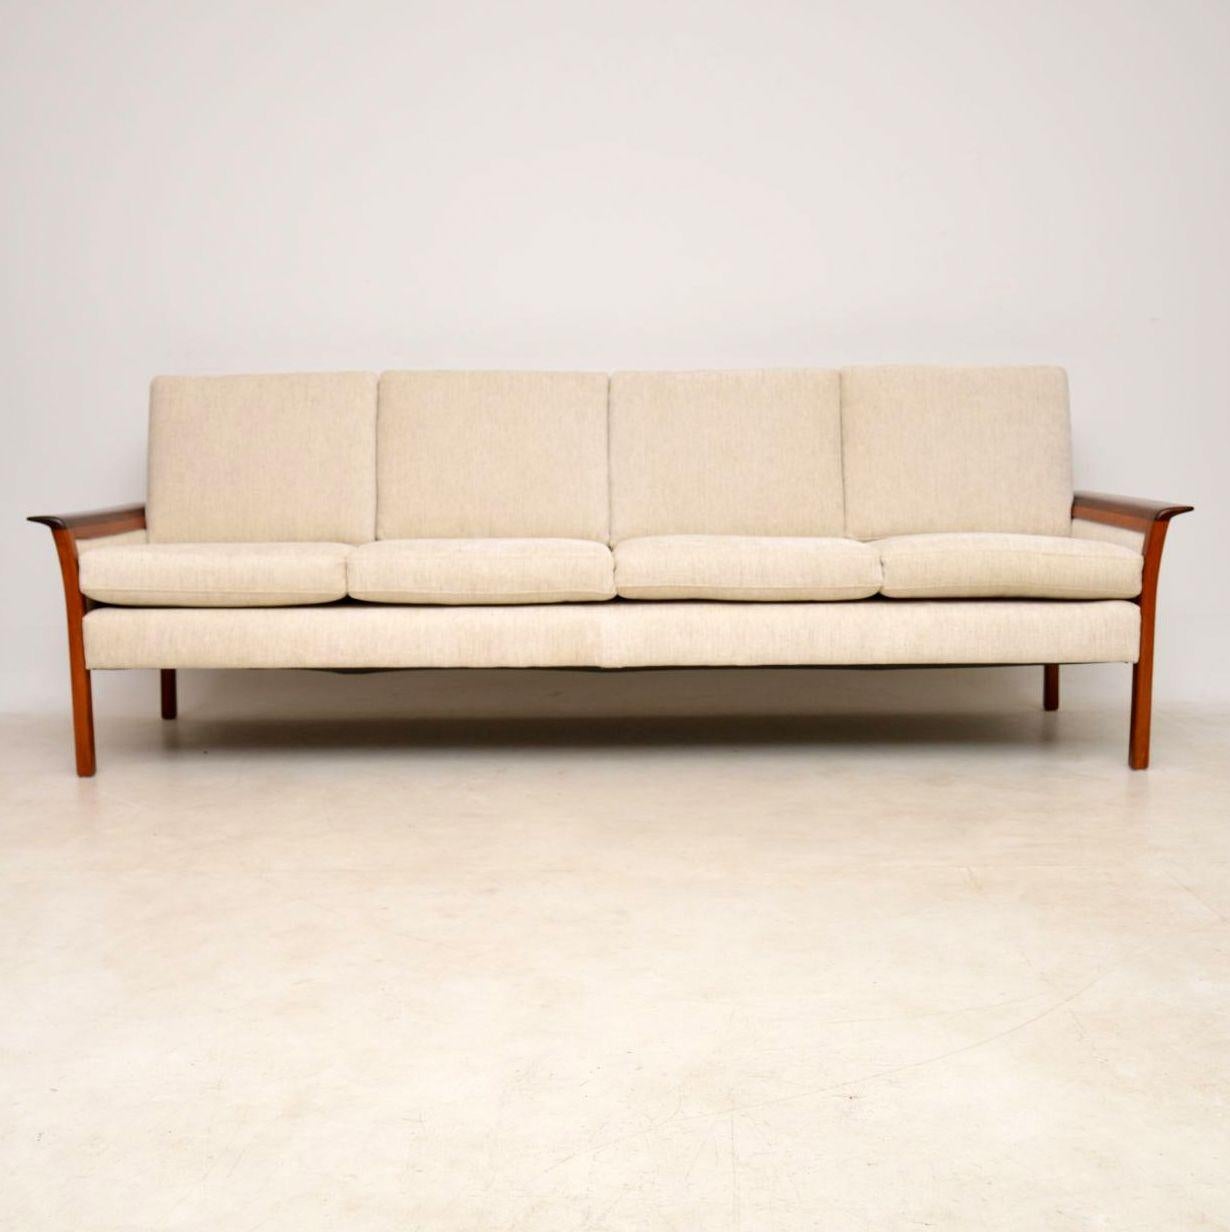 A stunning vintage four seat sofa designed by Knut Saeter for Vatne Mobler in Norway. Knut Saeter was actually the founder of the high end furniture company Vatne Mobler, and this set was designed in 1962. This particular one dates from the 1960s,